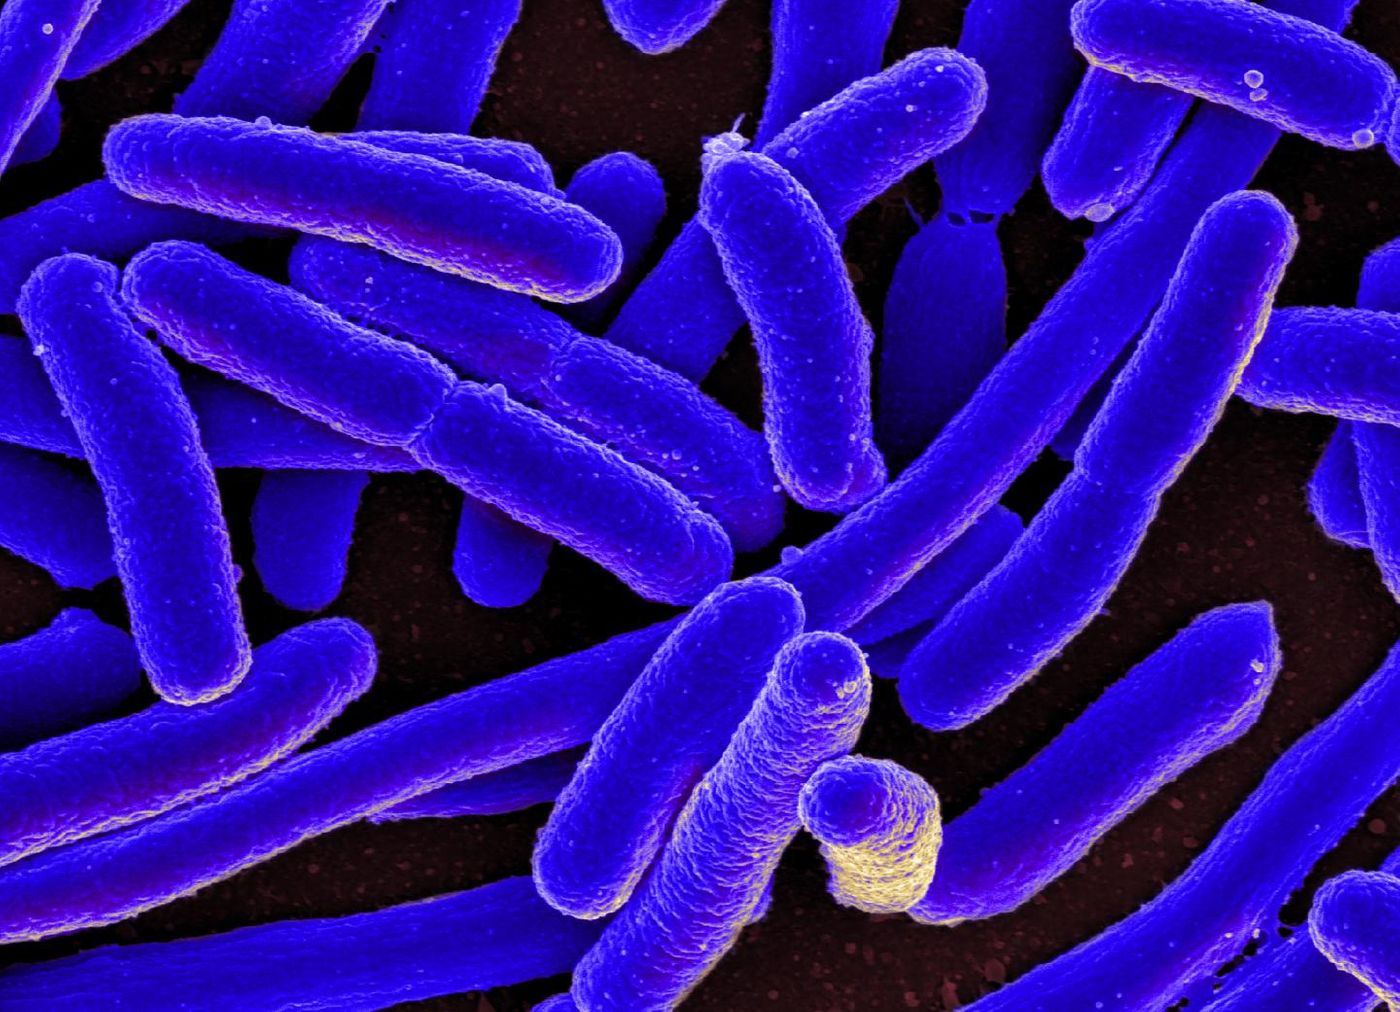 E. coli bacteria was used to study the sequences in DNA where the risk for mutation is significantly elevated. / Credit: National Institute of Allergy and Infectious Diseases